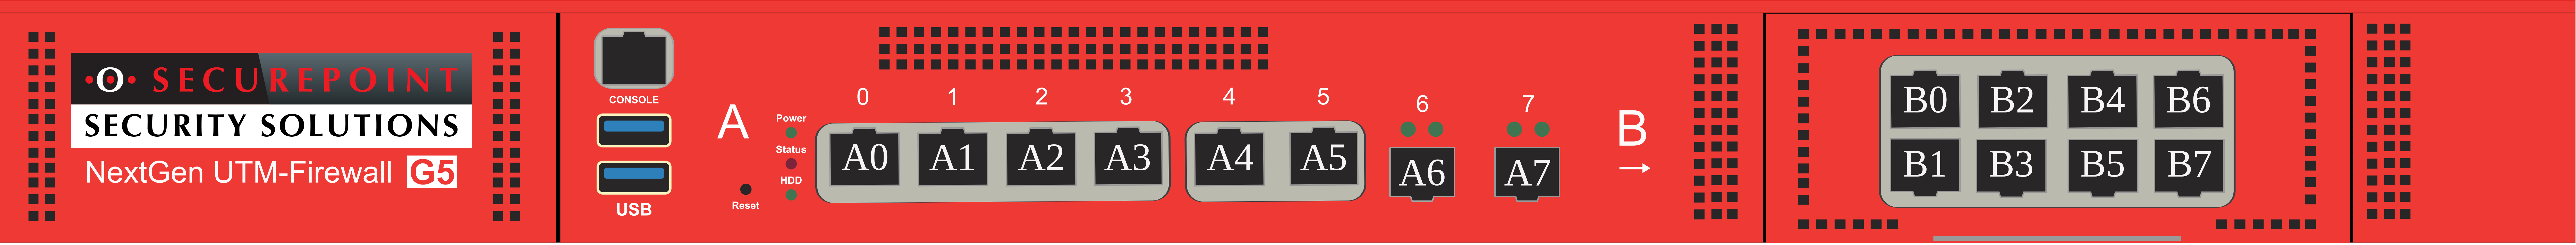 Datei:RC 300 Slot A+B8.png